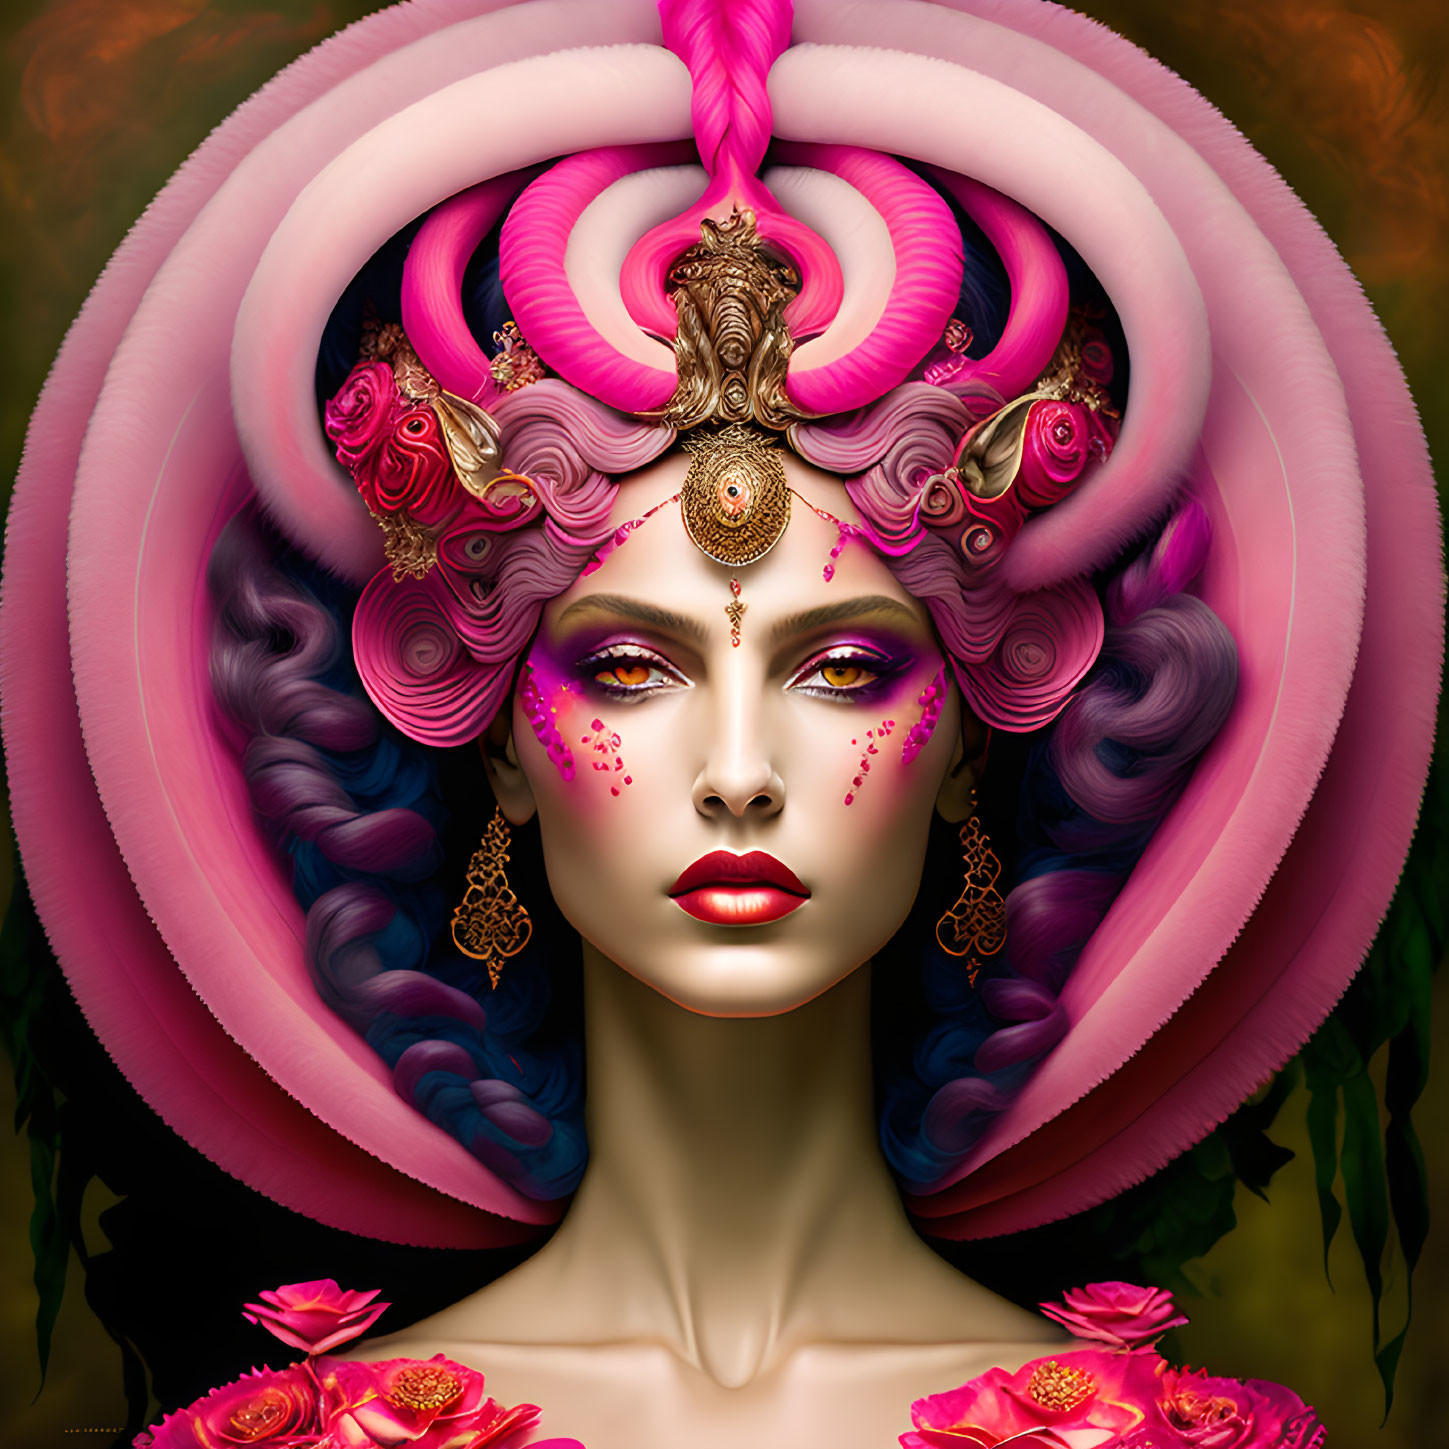 Elaborate Pink and Purple Floral Headgear on Woman Portrait